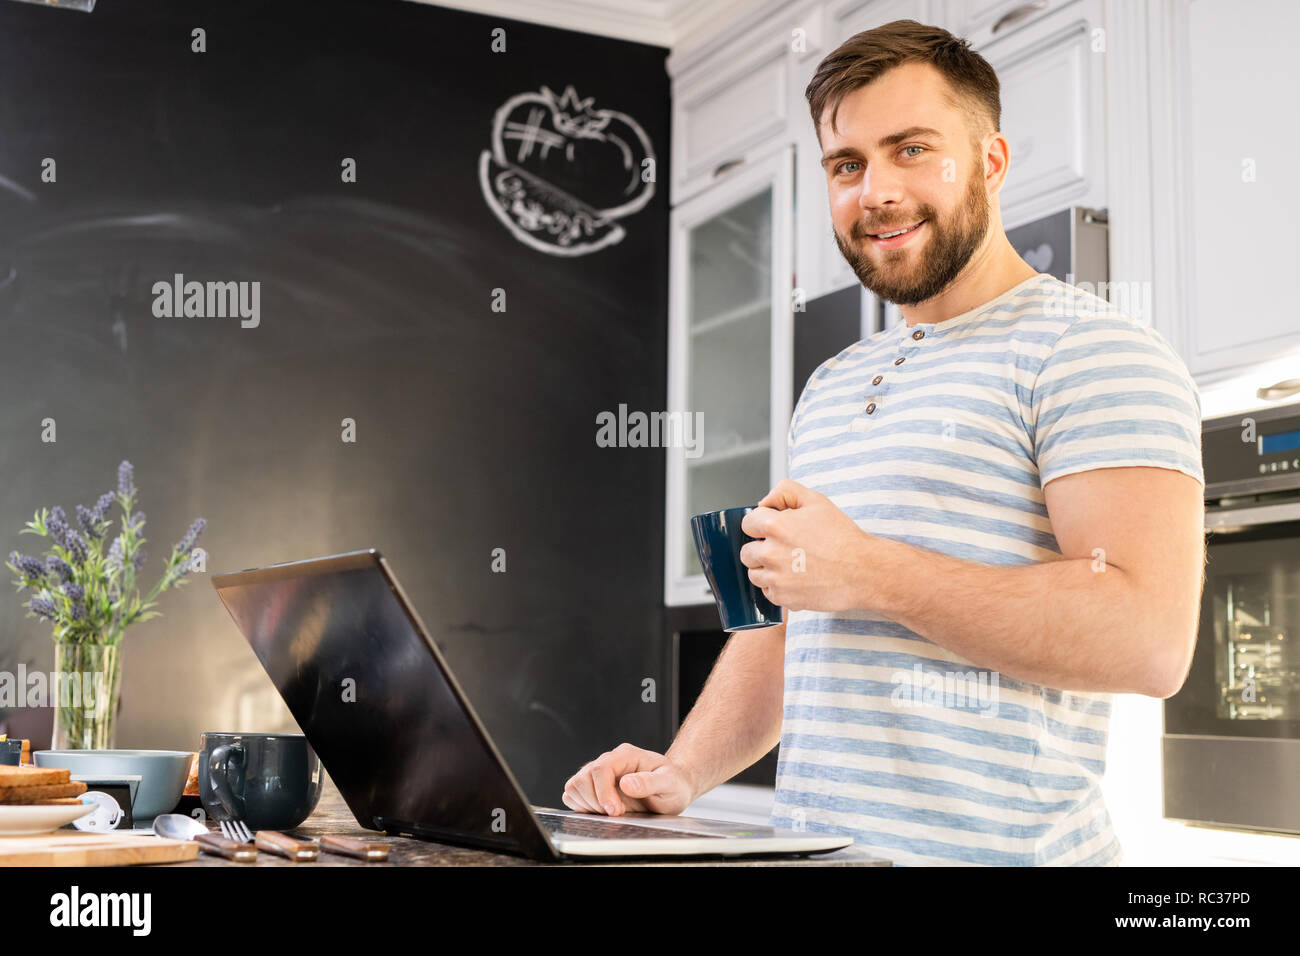 Young Man Using Laptop at Breakfast Stock Photo